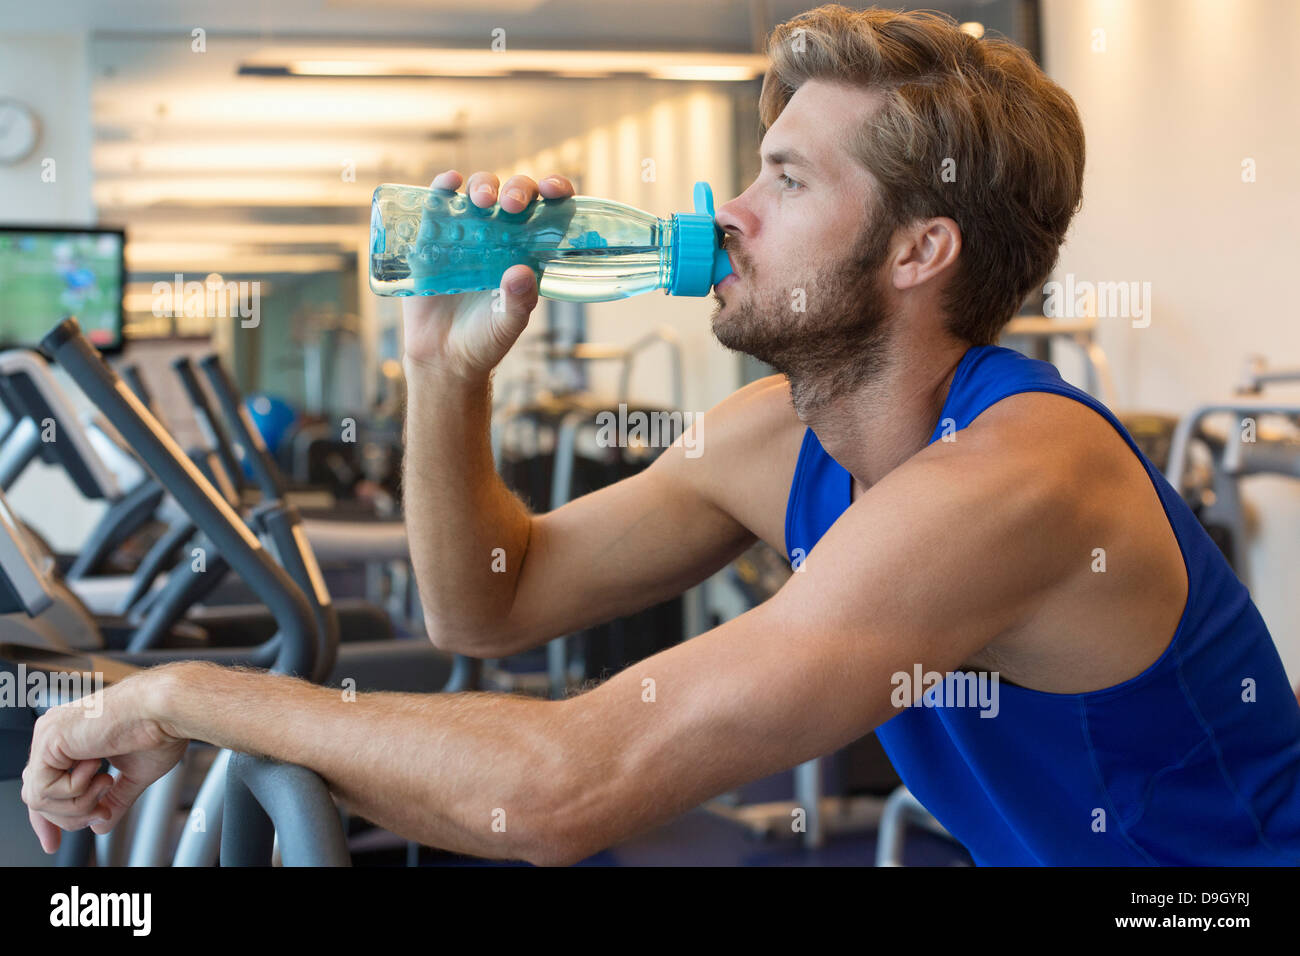 Man drinking water from a bottle at a gym Stock Photo